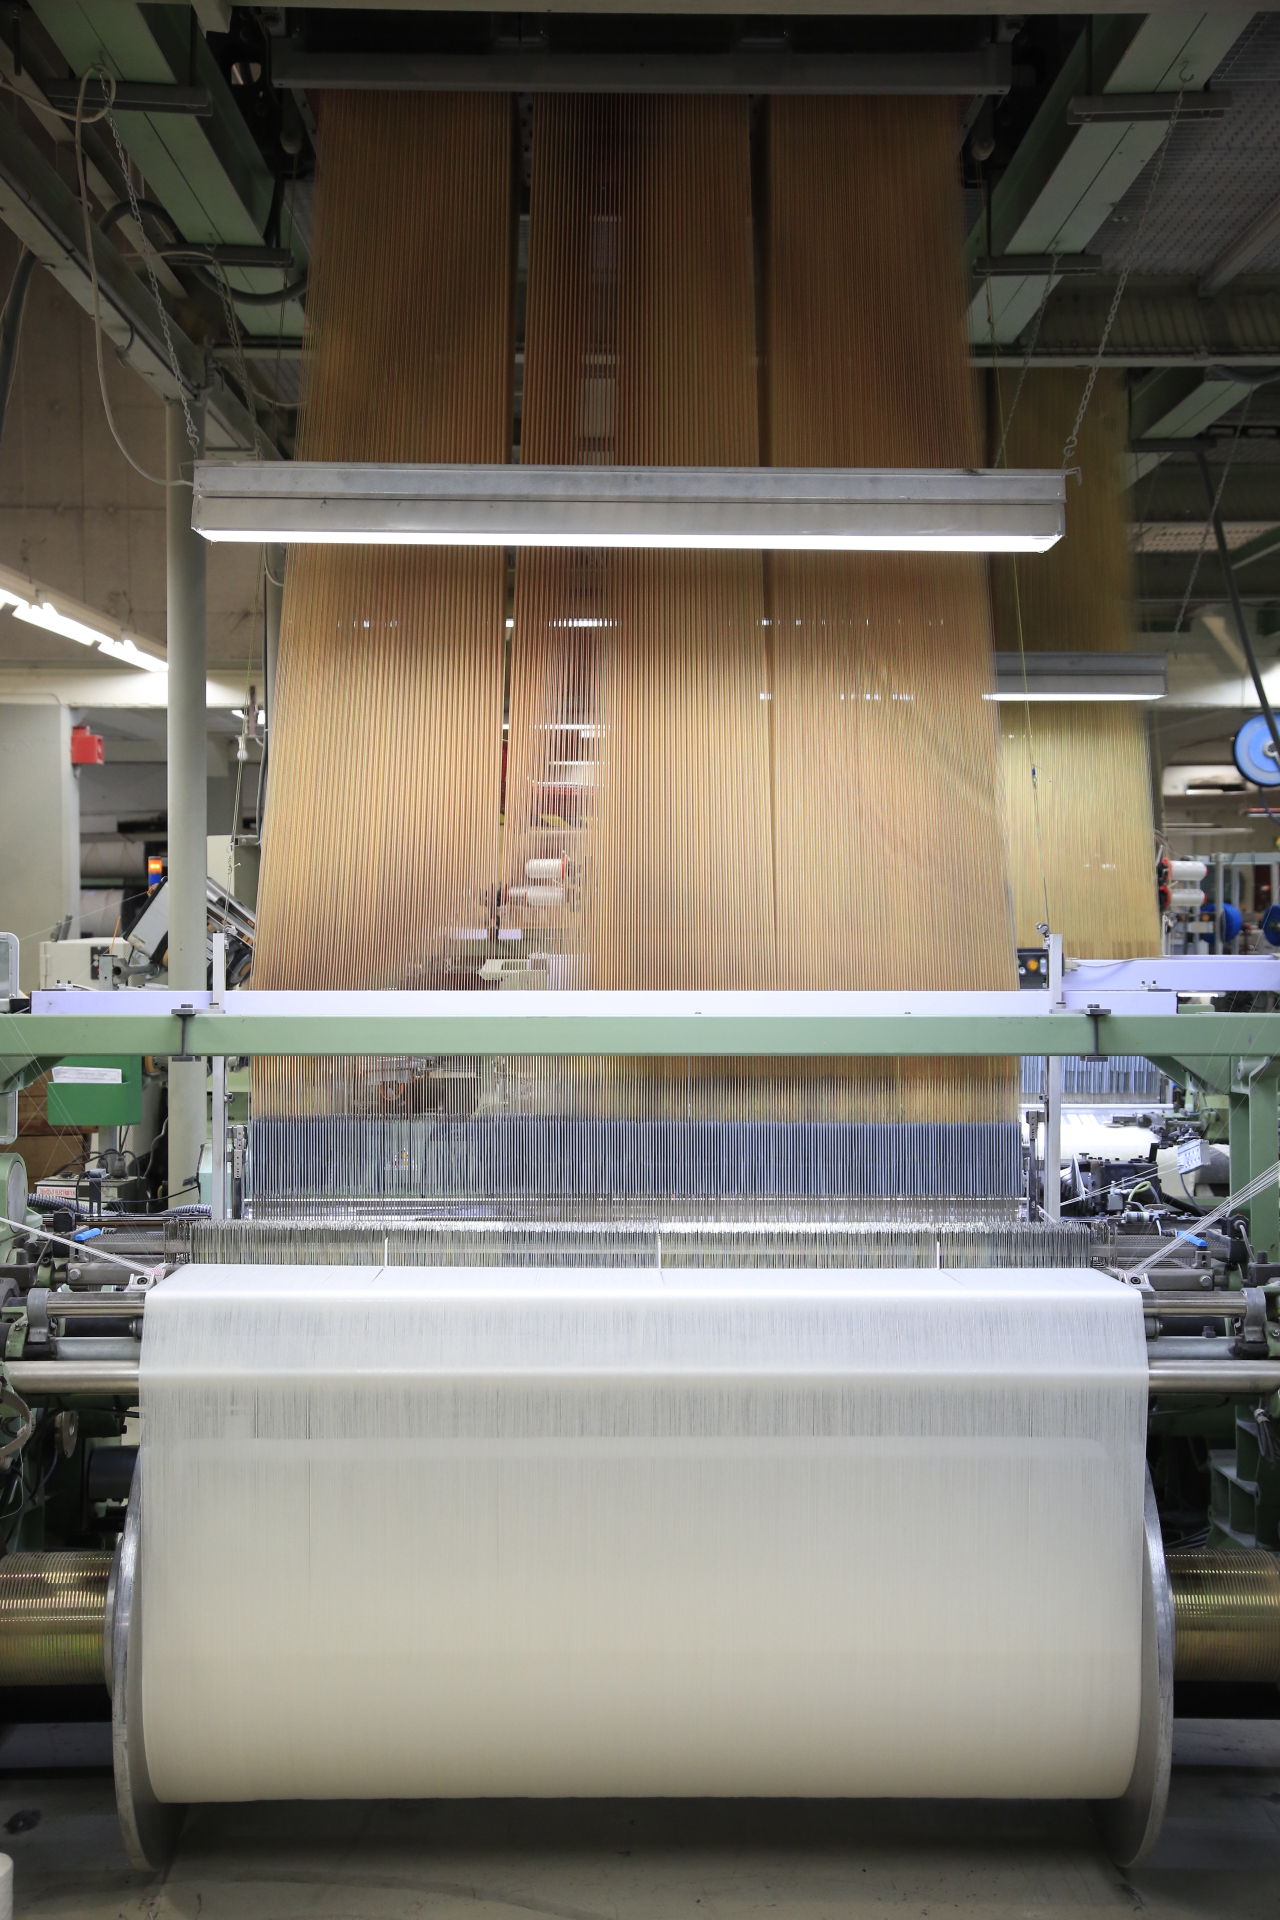 An editorial image from behind the scenes at the Palo Sofa textile factory.